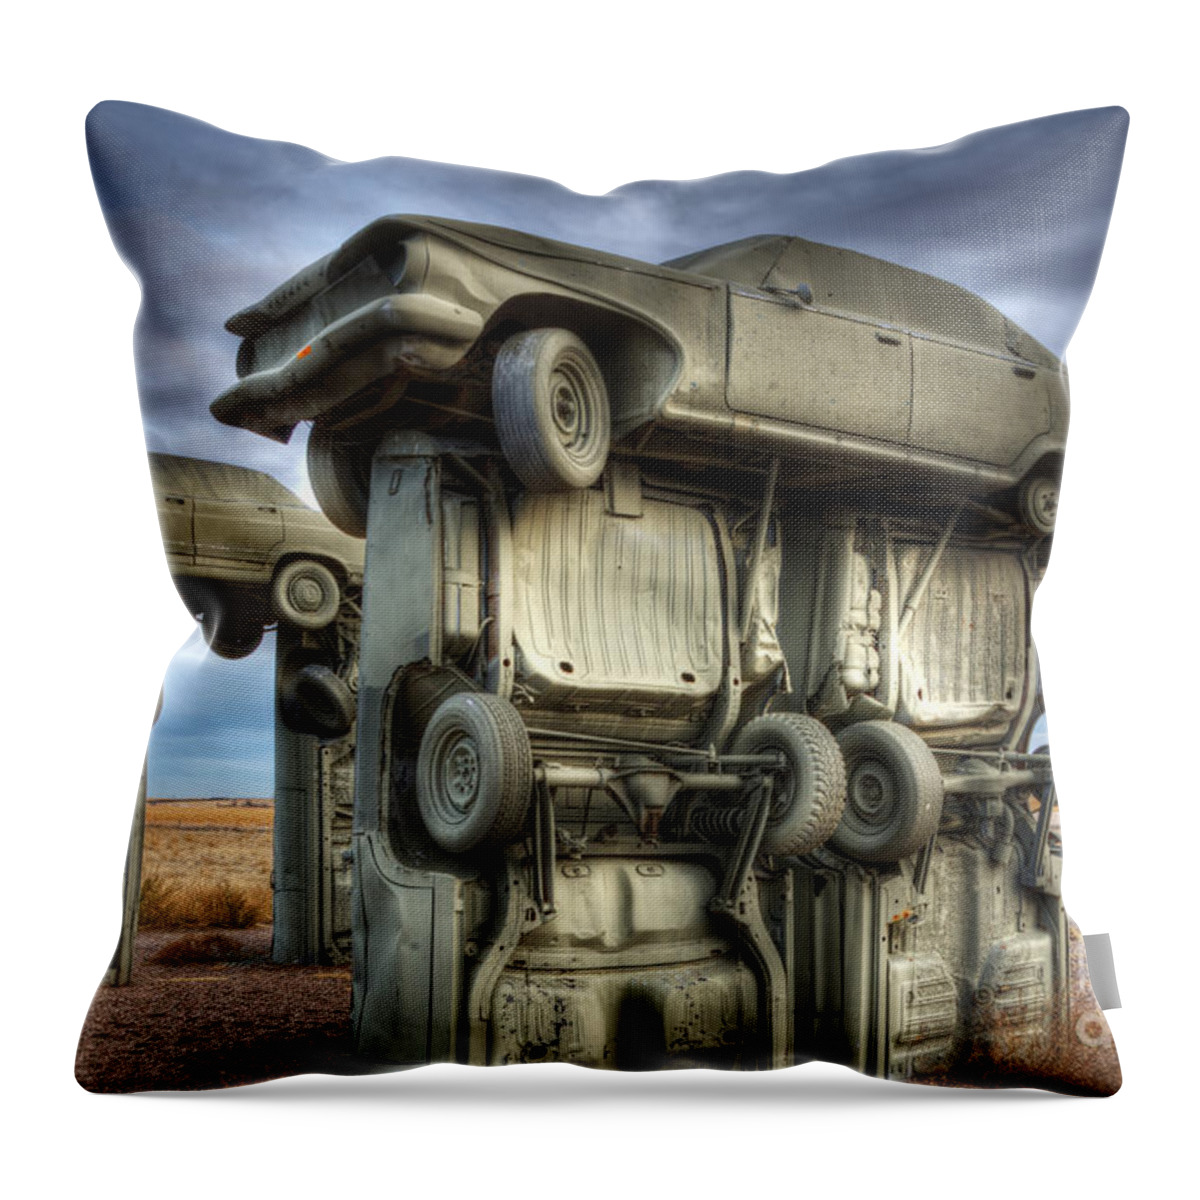 Carhenge Throw Pillow featuring the photograph Carhenge Automobile Art 2 by Bob Christopher